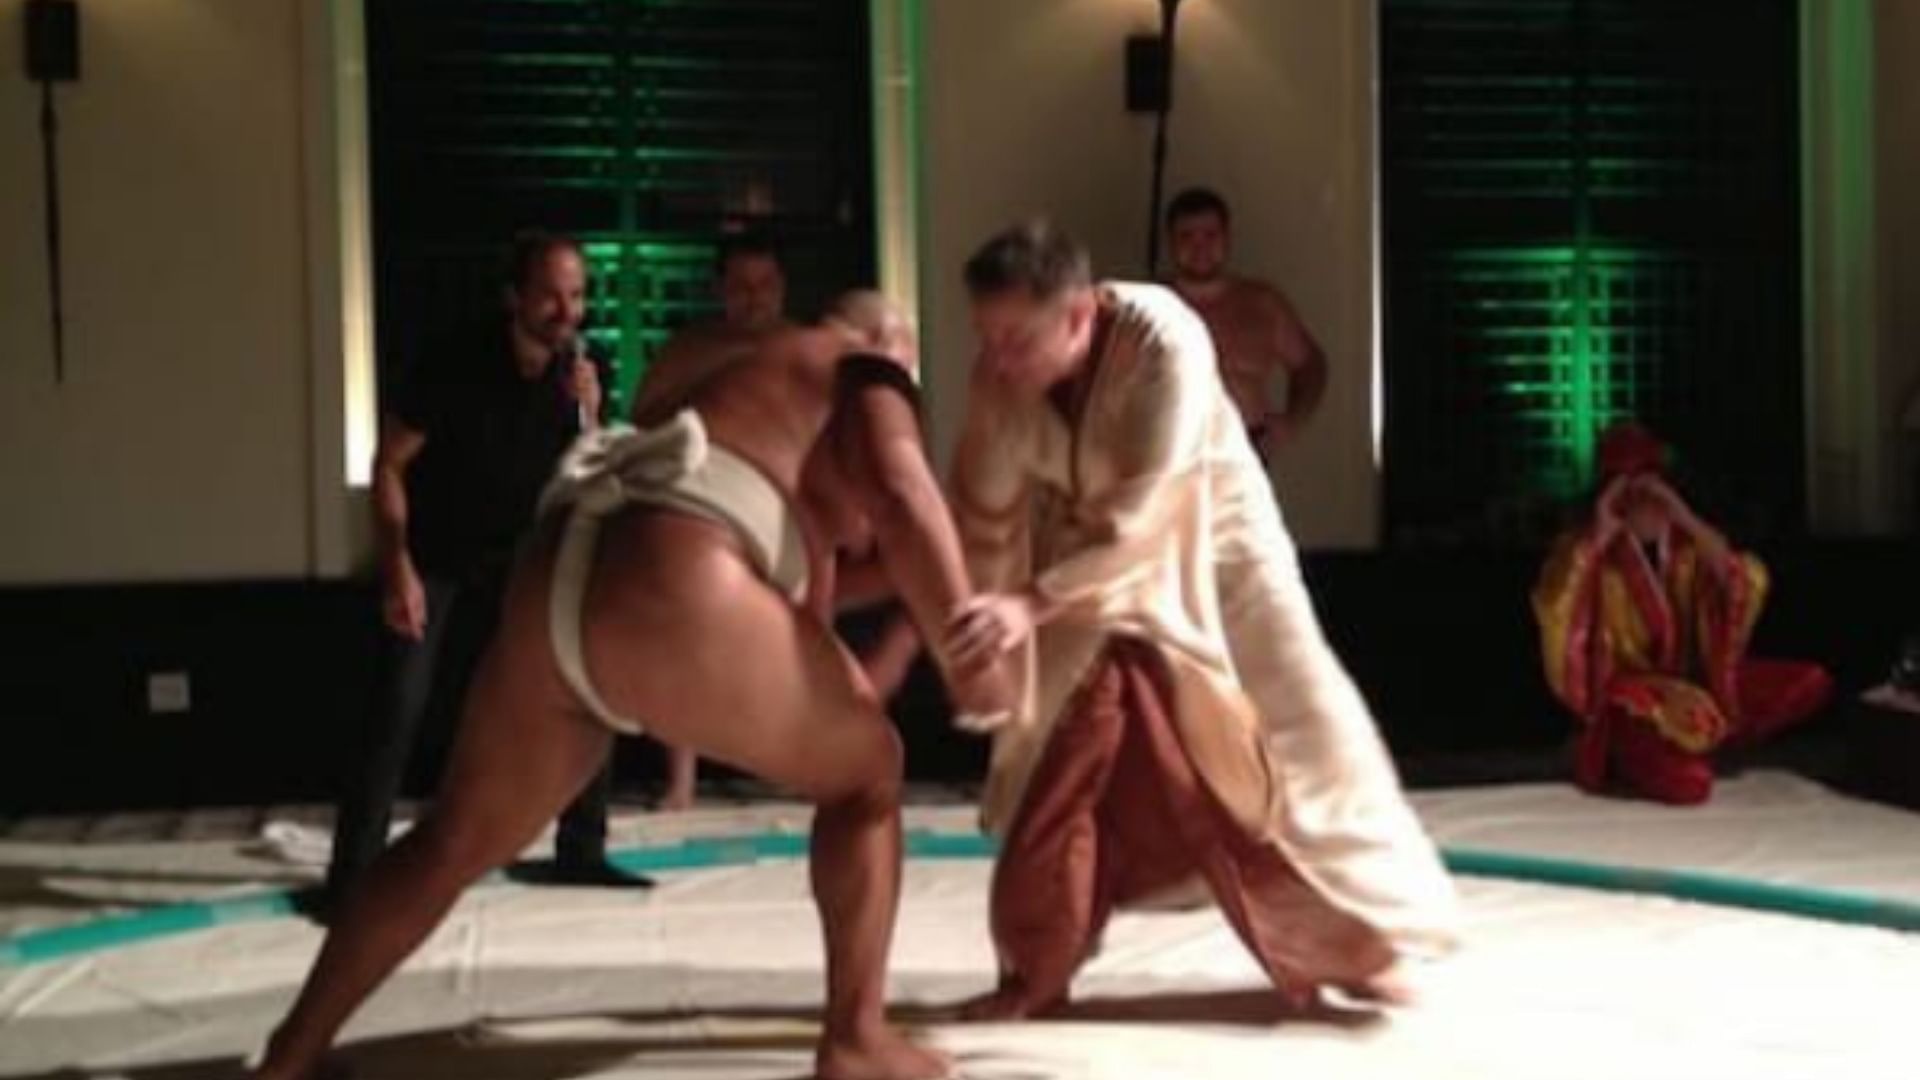 Elon Musk Tweet Picture of Elon Musk fighting with a sumo wrestler went viral on social media